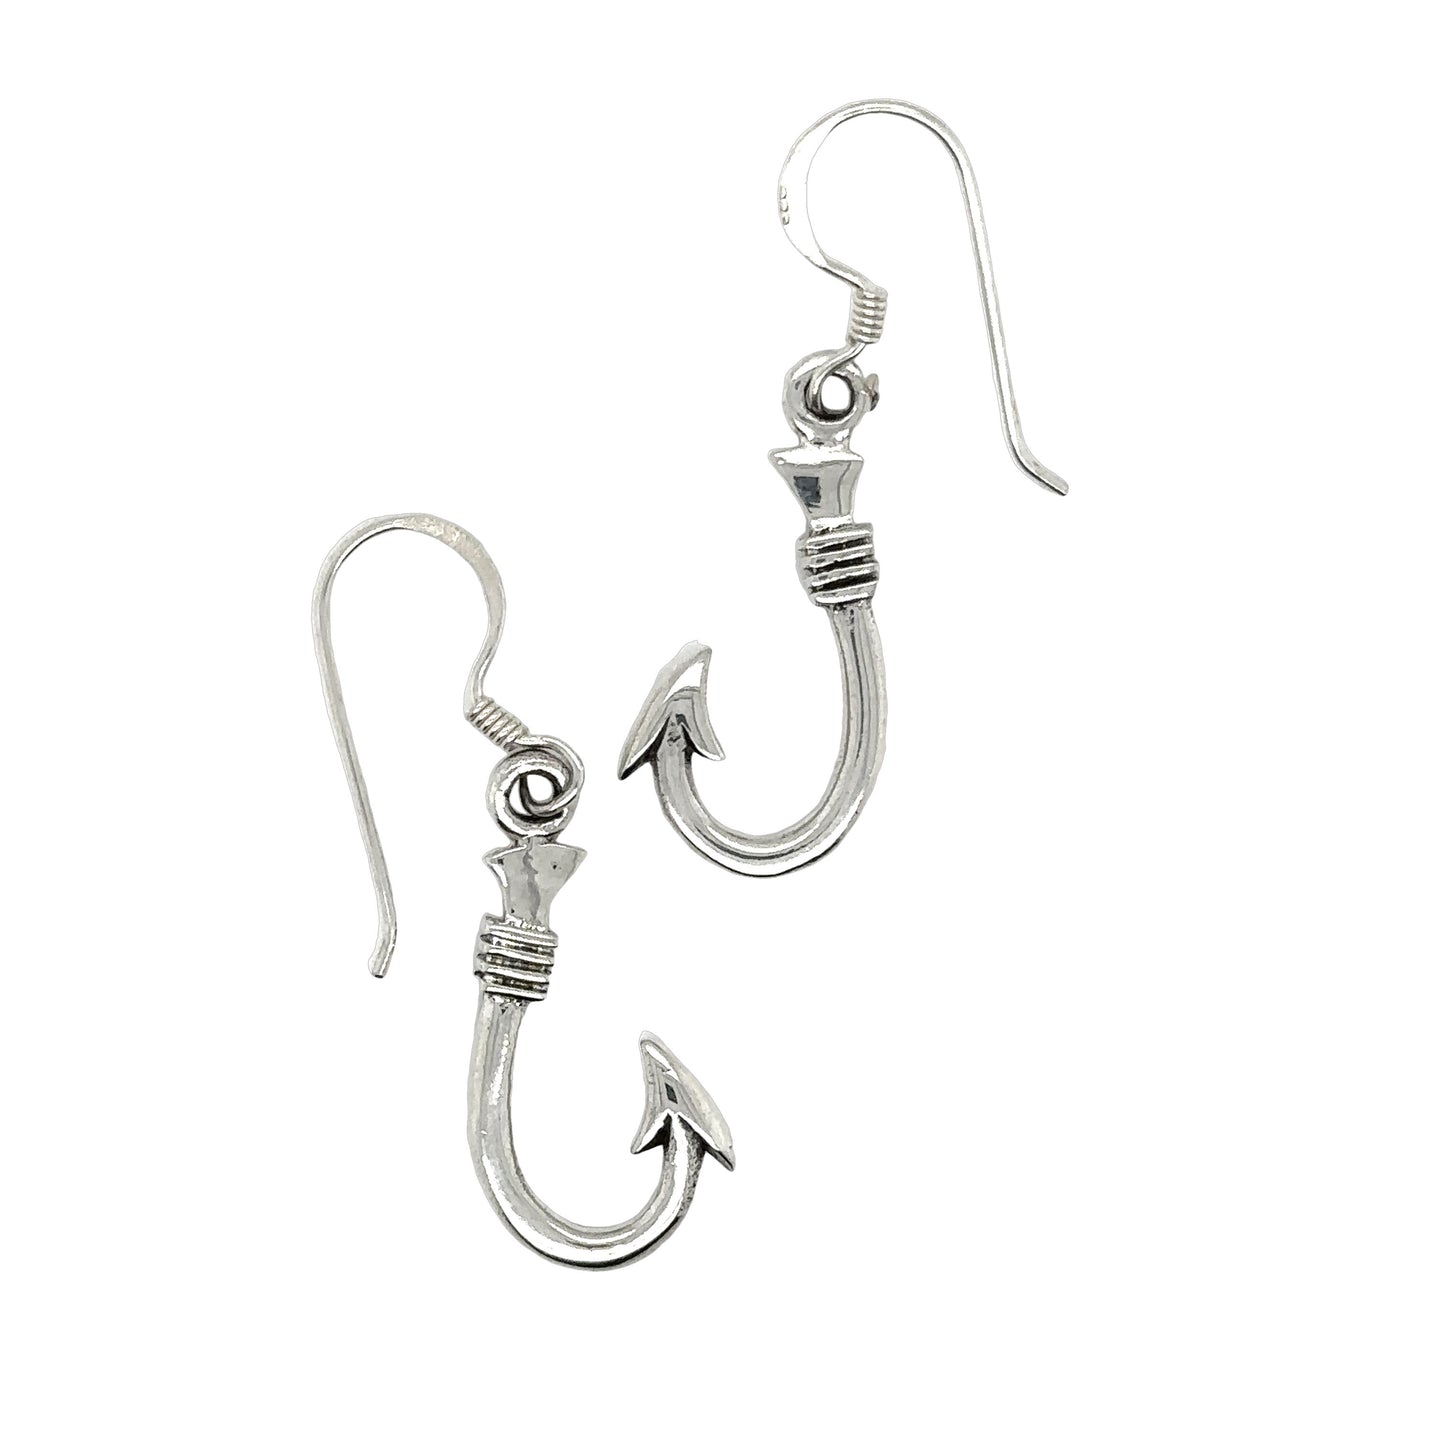 A pair of Super Silver Fishhook Earrings on a white background.